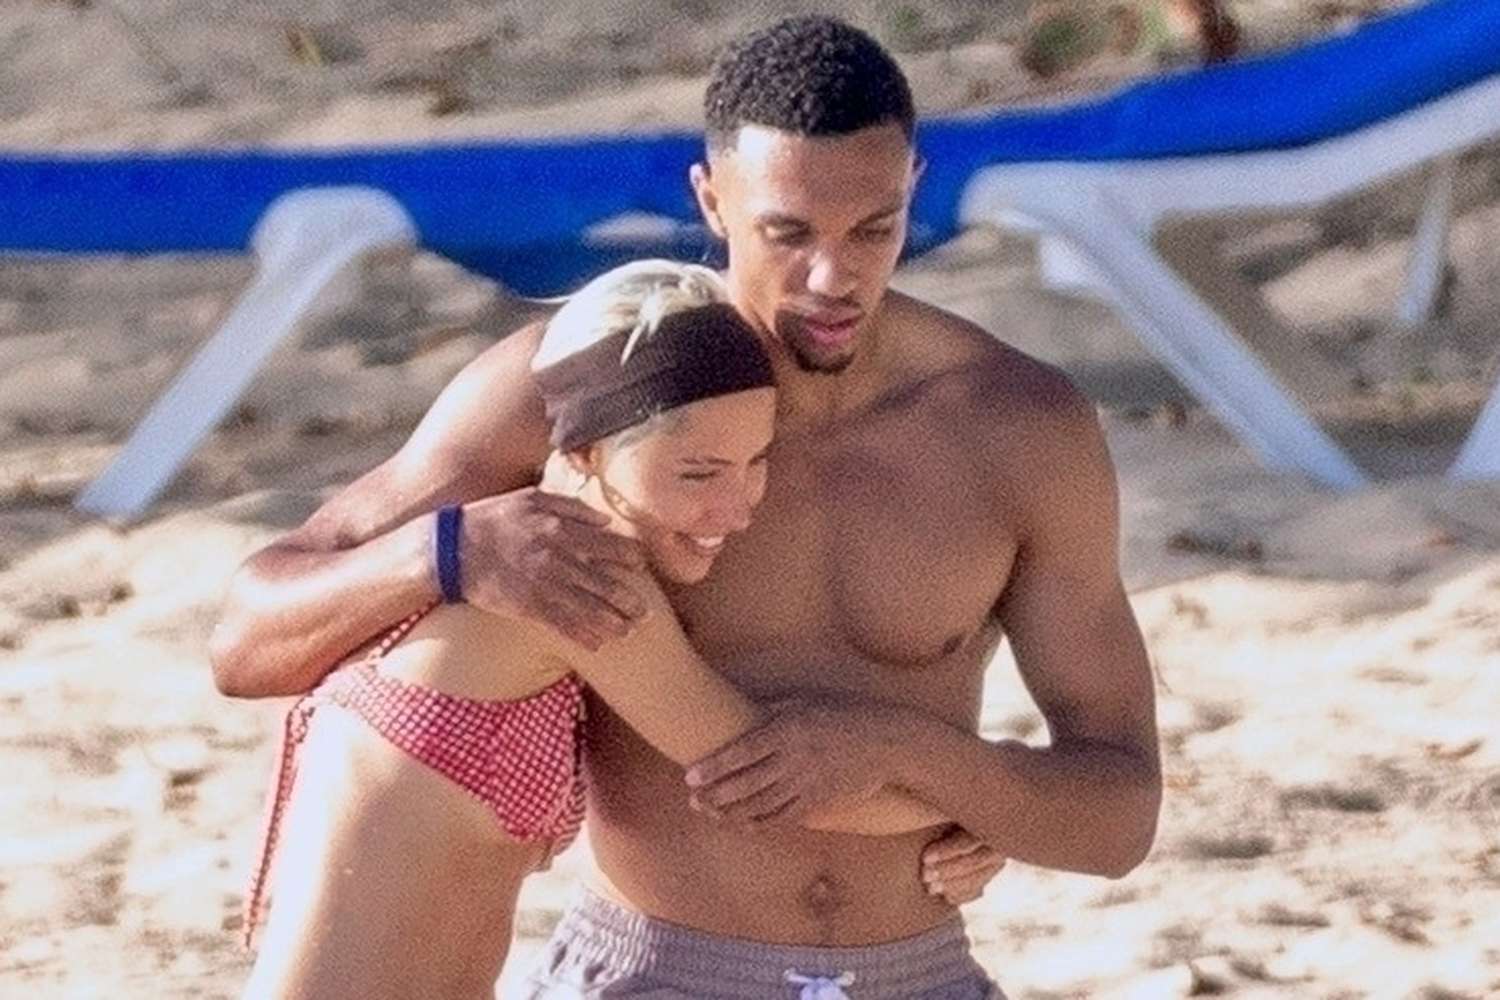 Jude Law's Daughter Iris Law Seen Getting Close with English Soccer Player Trent Alexander-Arnold in Barbados